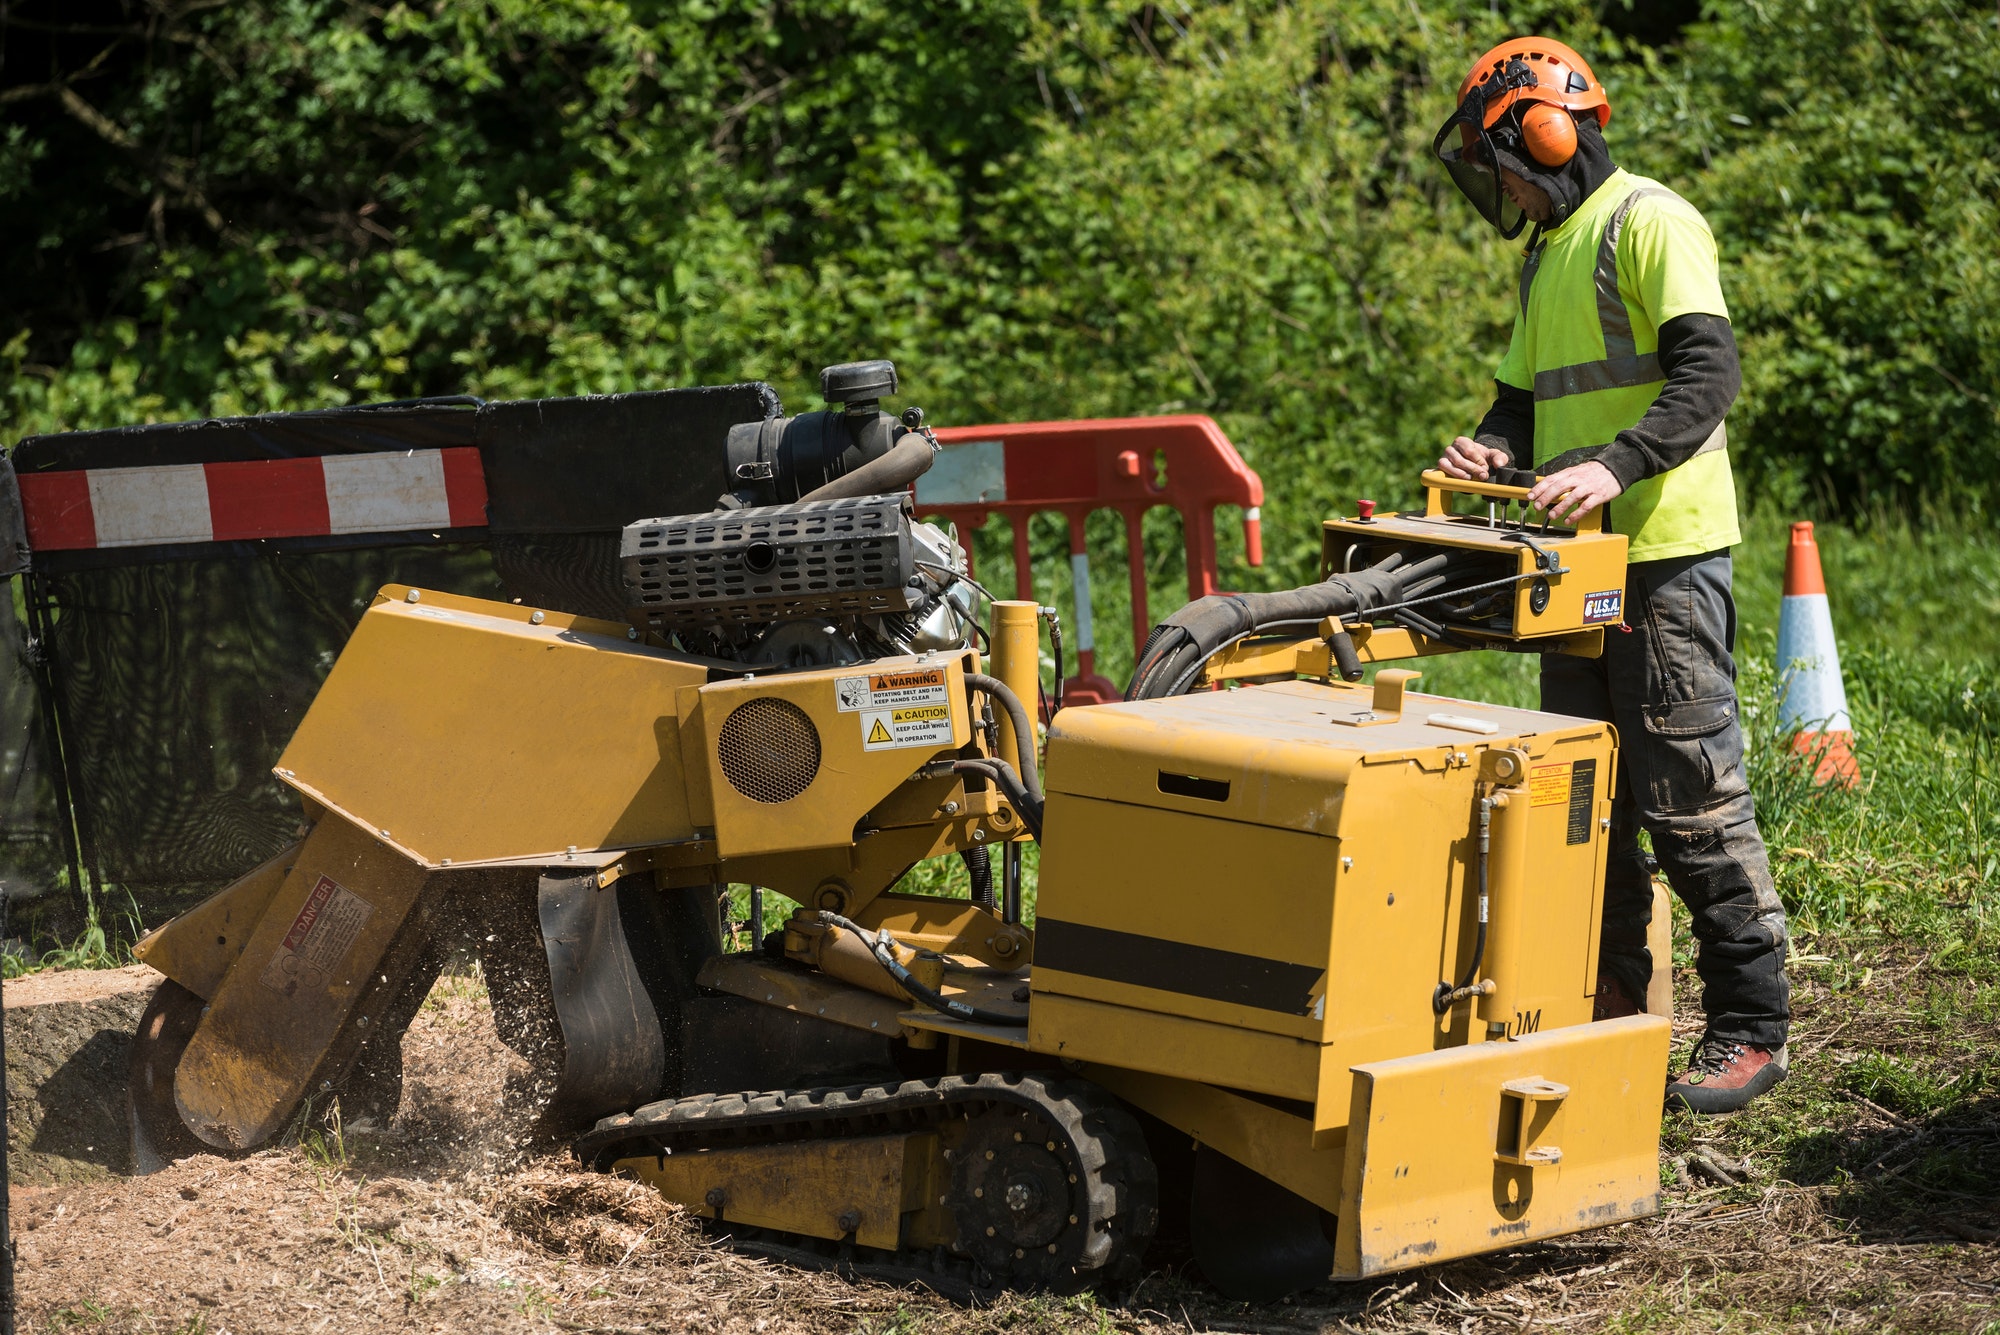 A heavy duty stump grinder with rubber caterpillar tracks being used to grind out the remaining tree